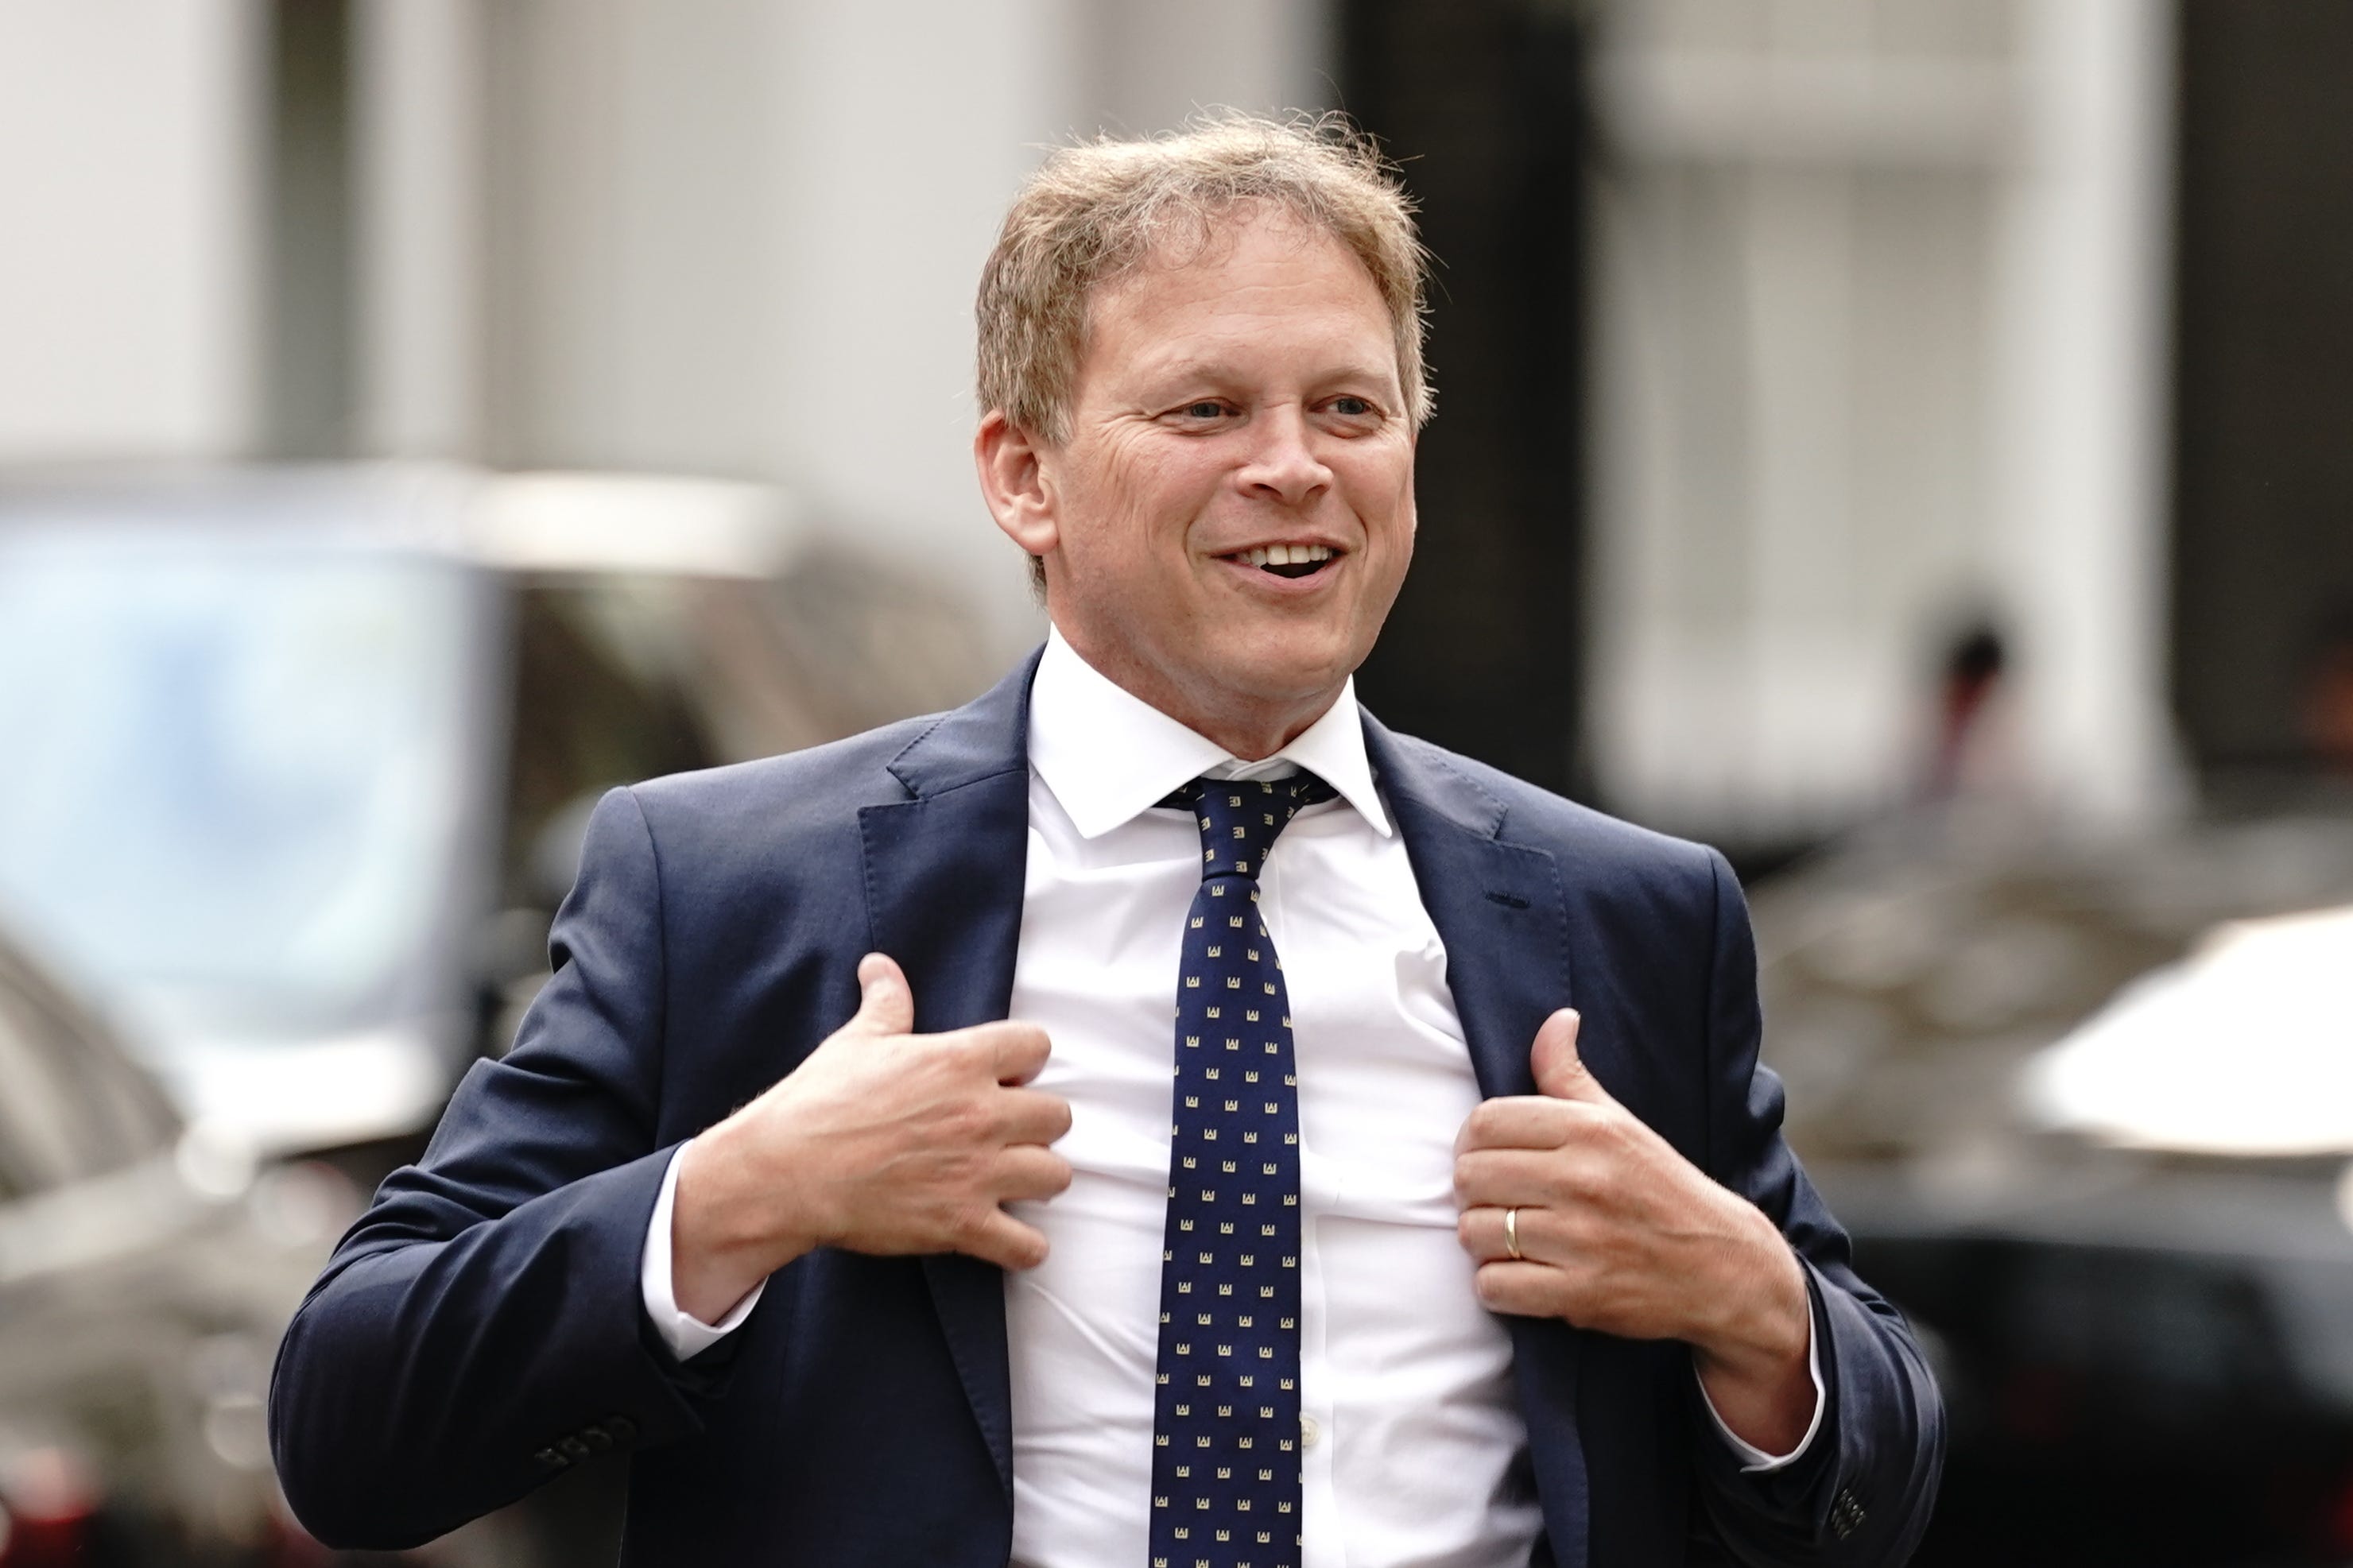 Even Sunak must know Shapps is not the strongest retail offer his party could make to disillusioned voters